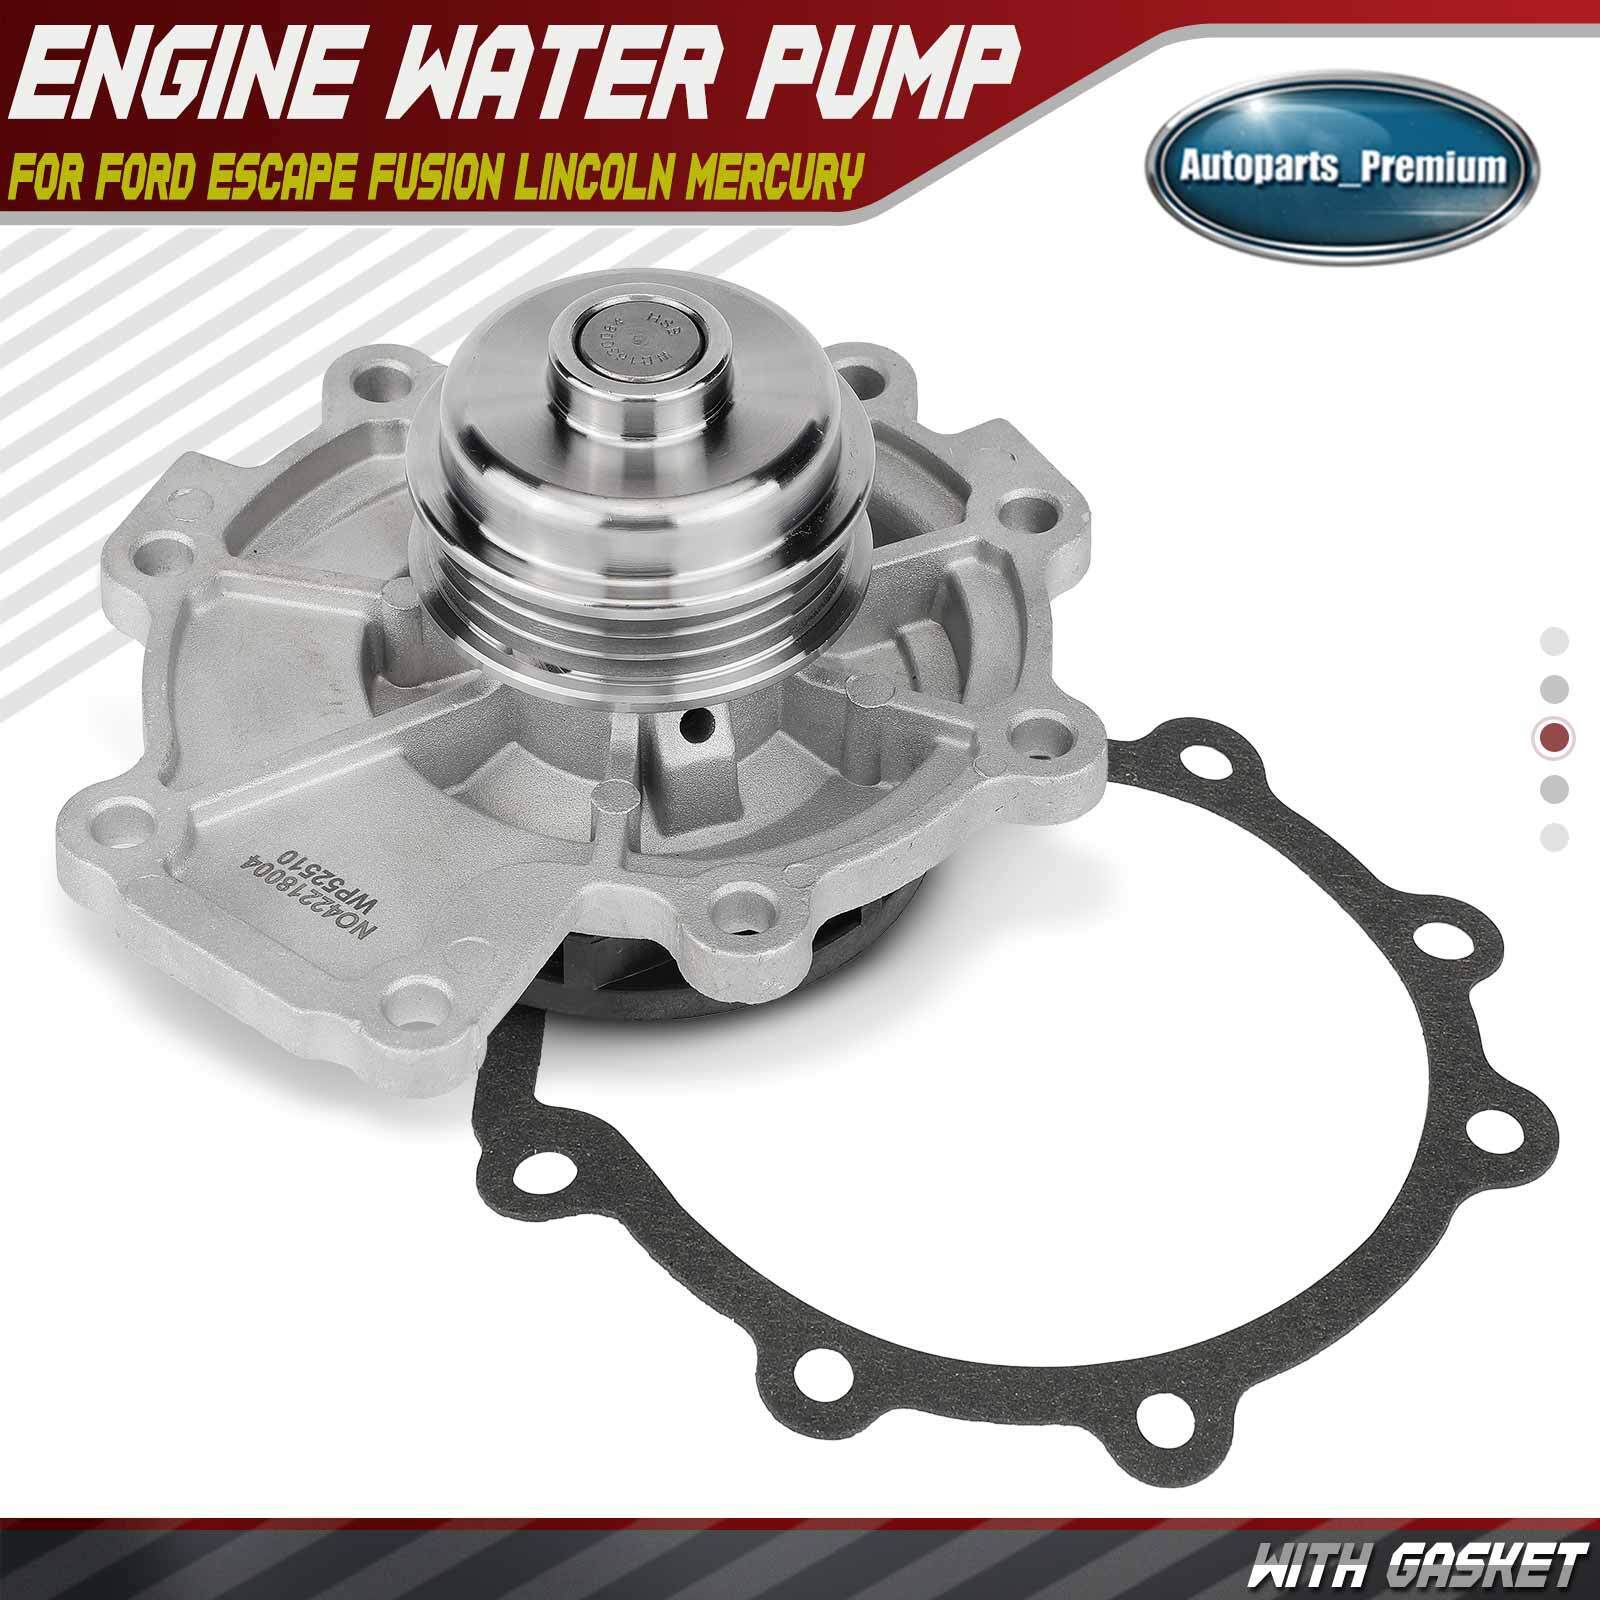 New Water Pump with Gasket for Ford Escape 2006-2008 3.0L Lincoln Zephyr Mazda 6